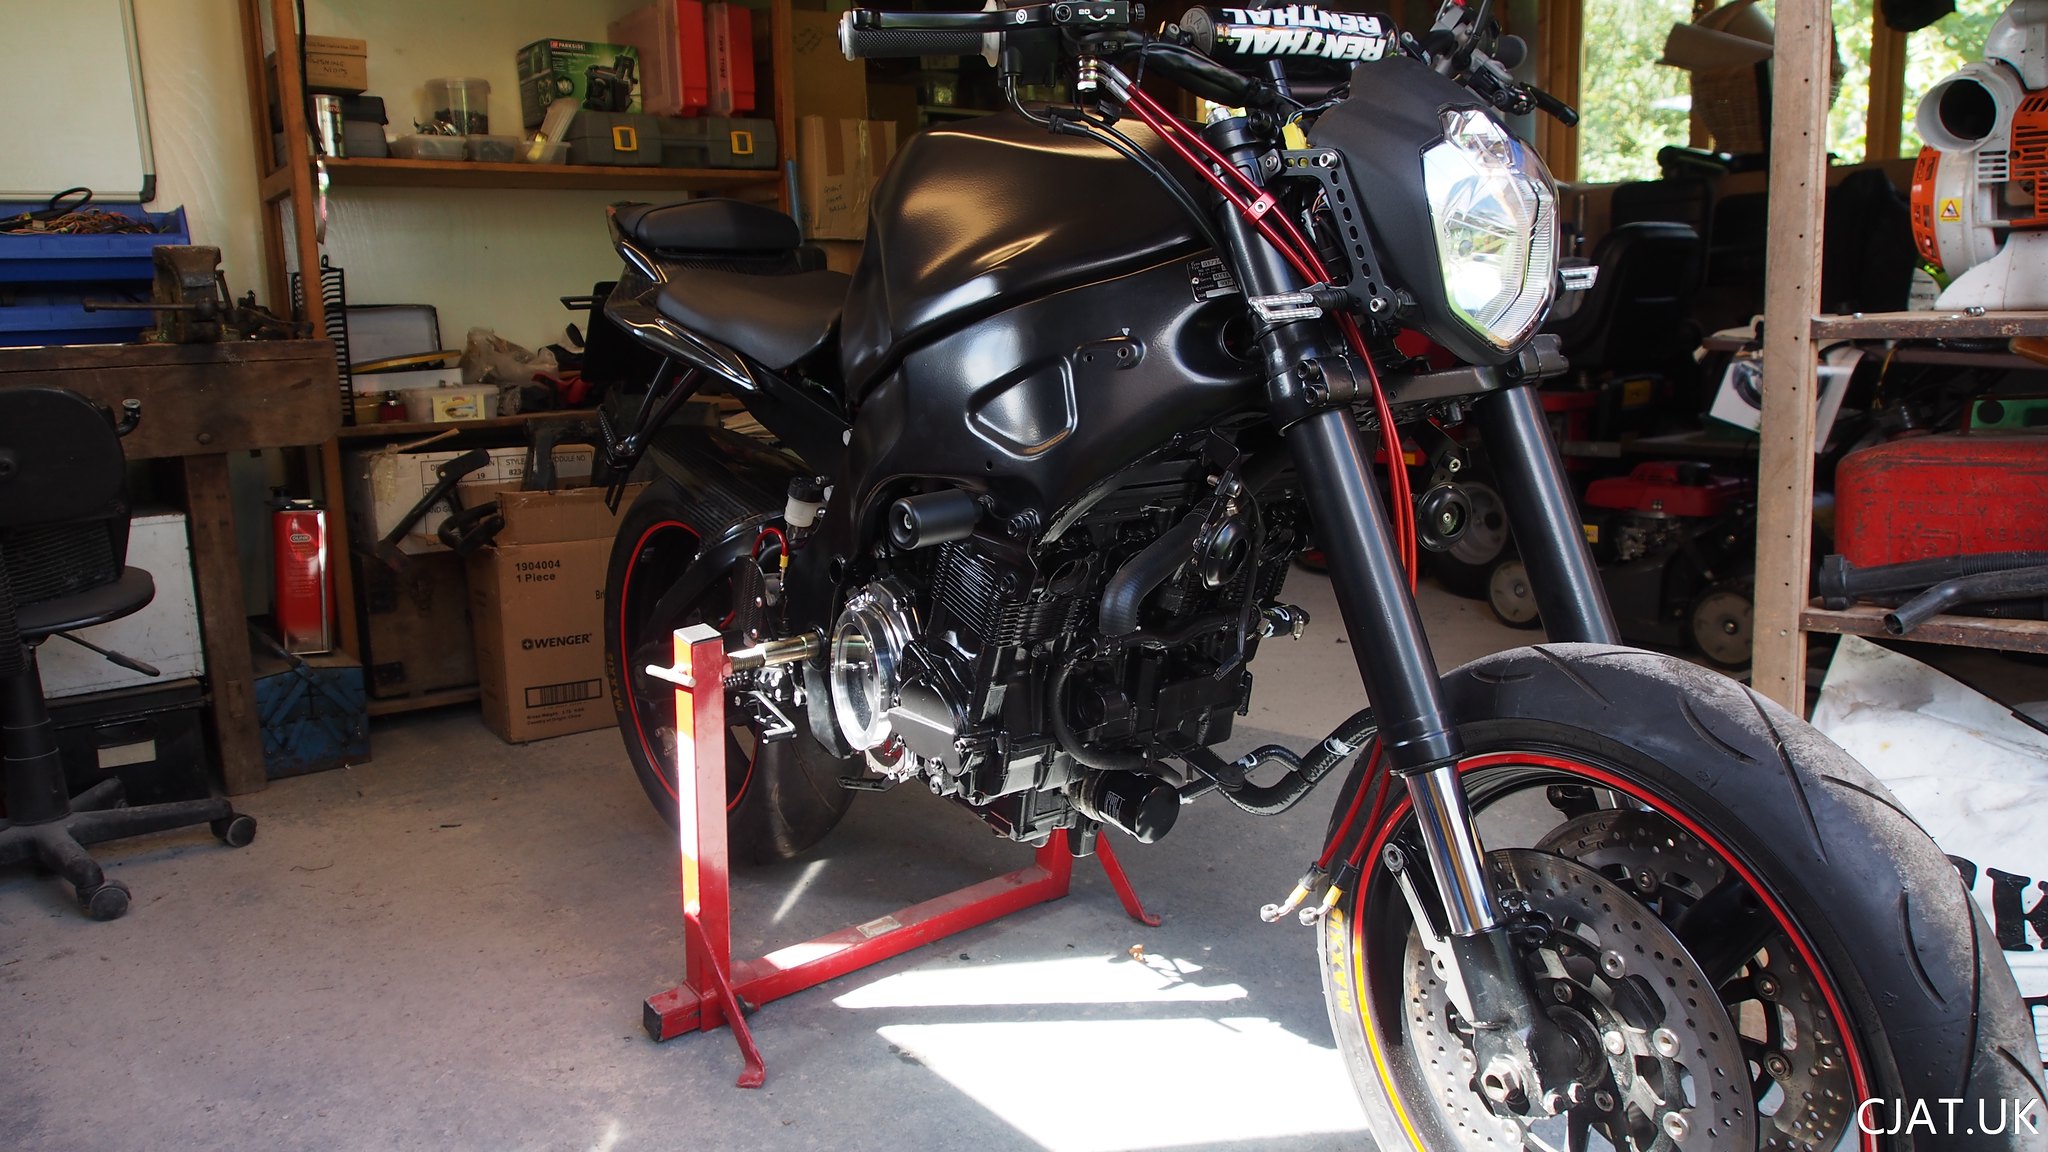 suzuki rf900 braided brake lines and new headlight with USD forks from a gsxr1100